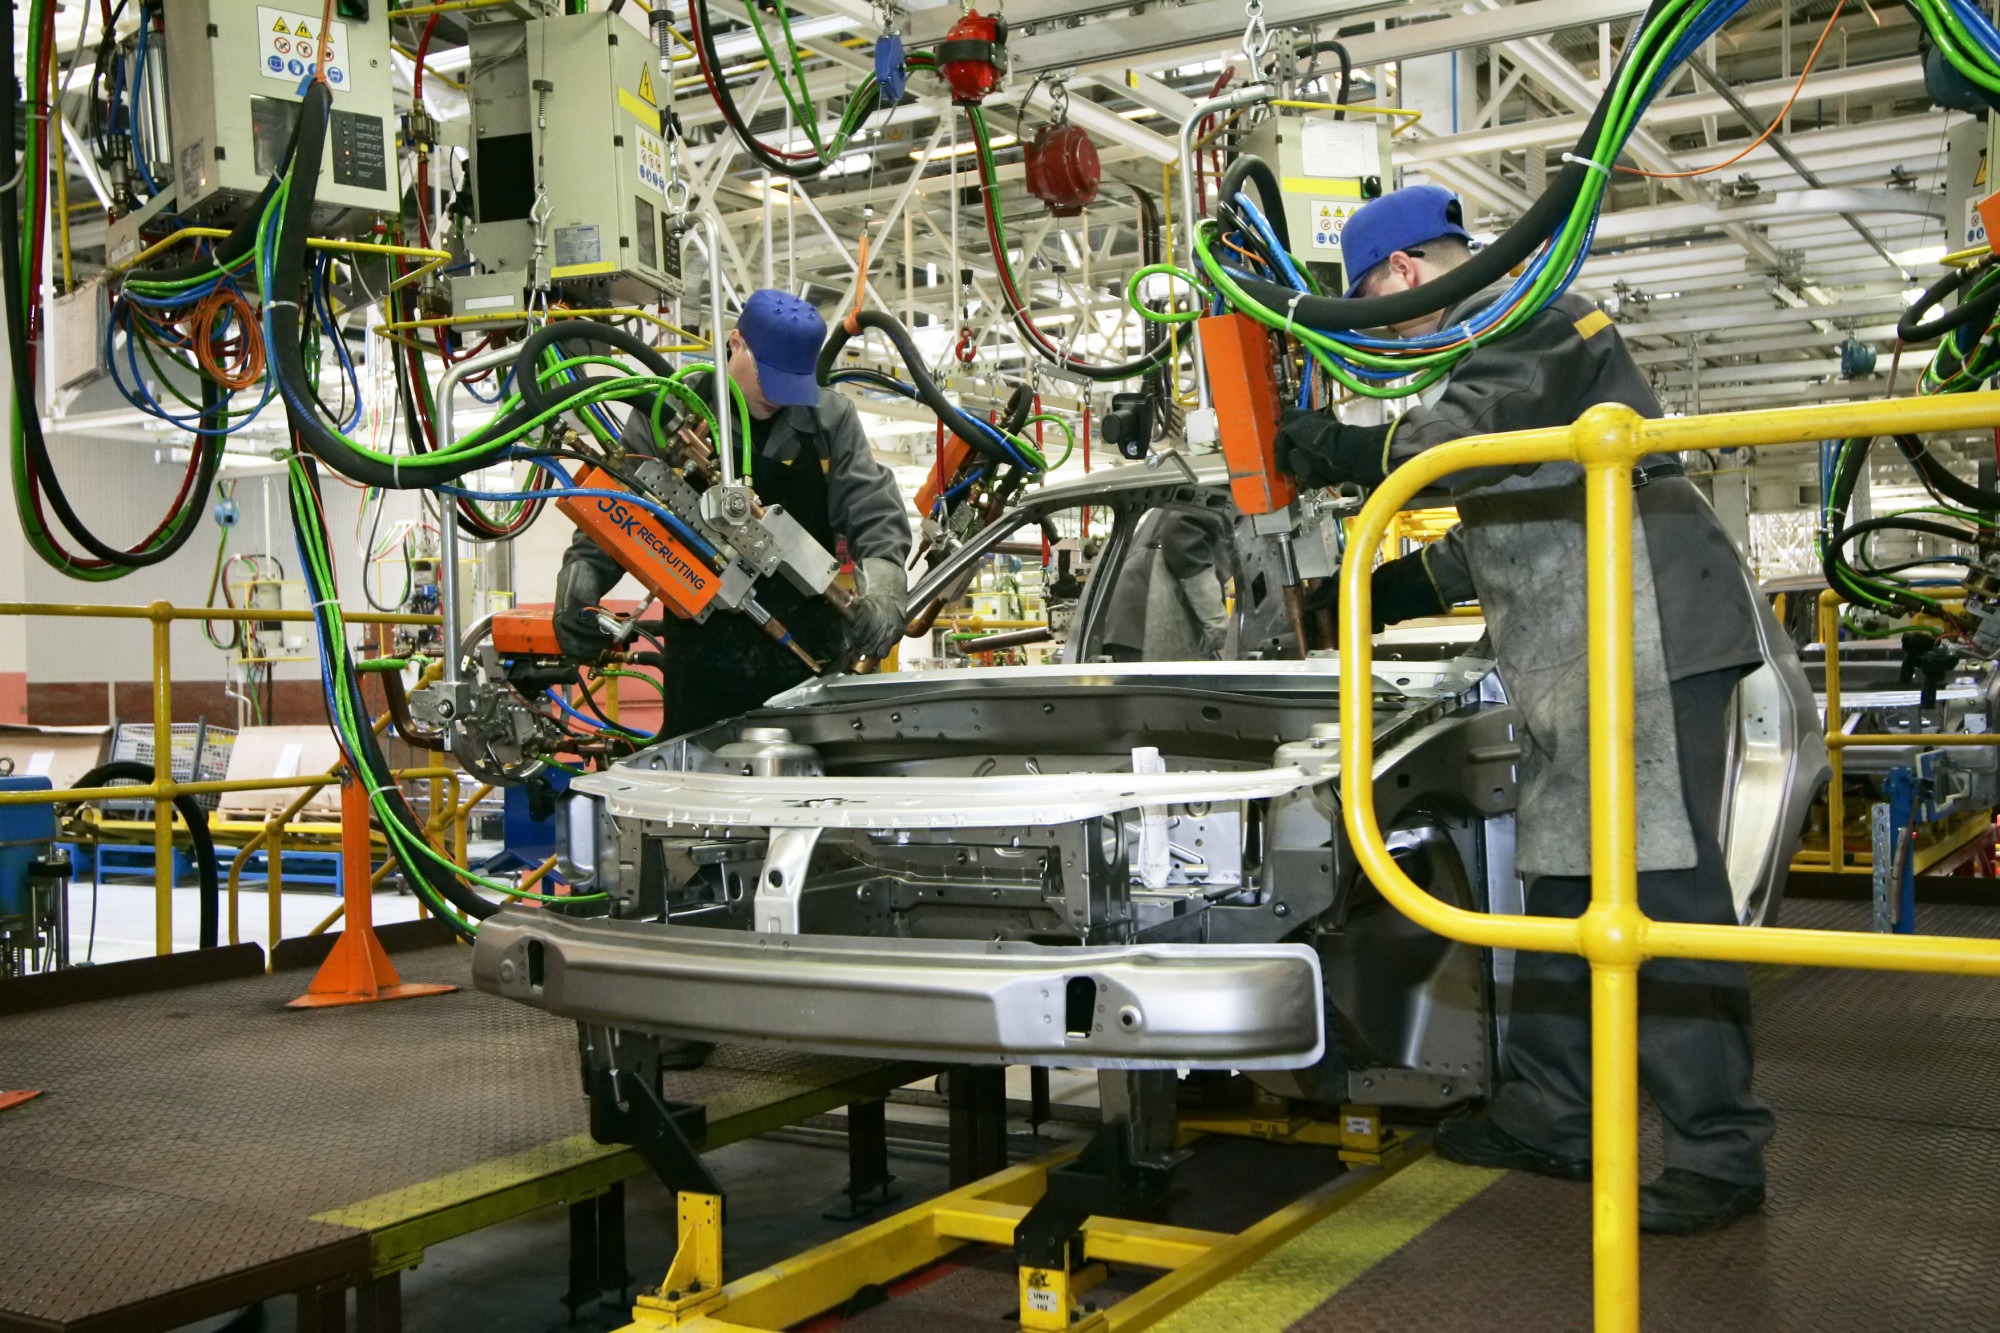 Food Manufacturing or Automotive Manufacturing